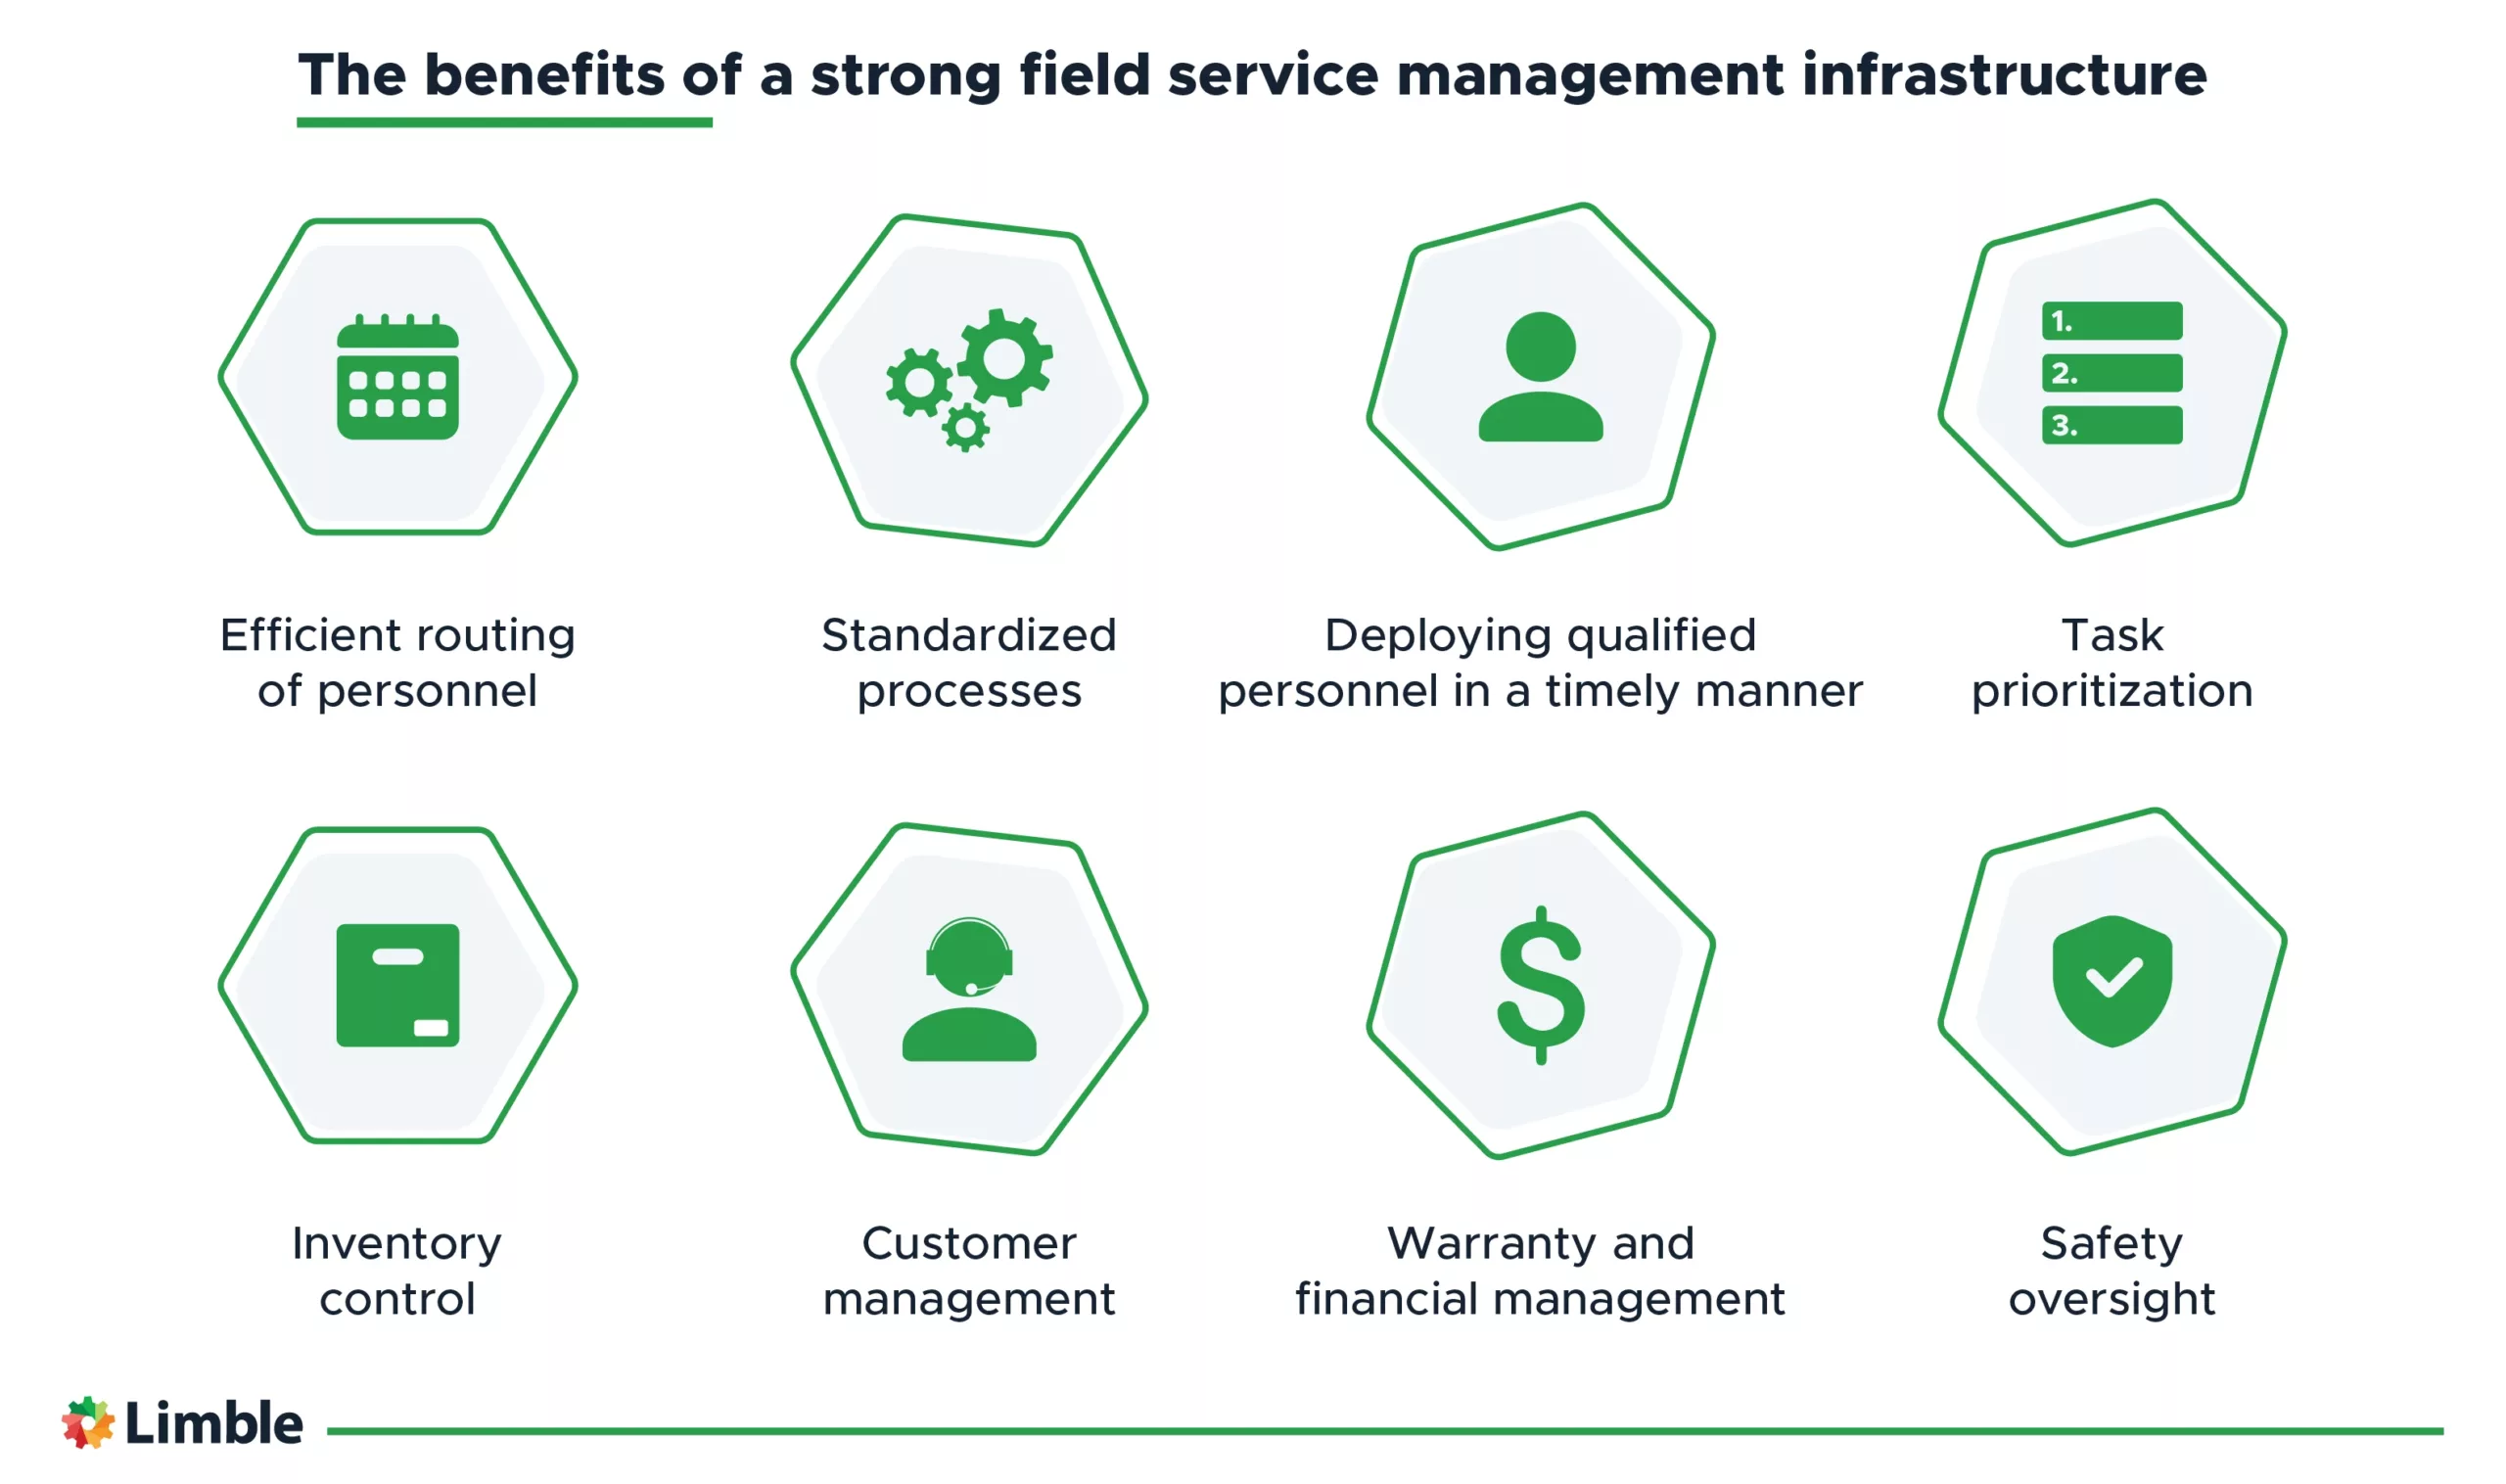 The list of benefits that explain why it is important to establish a strong field service management infrastructure.